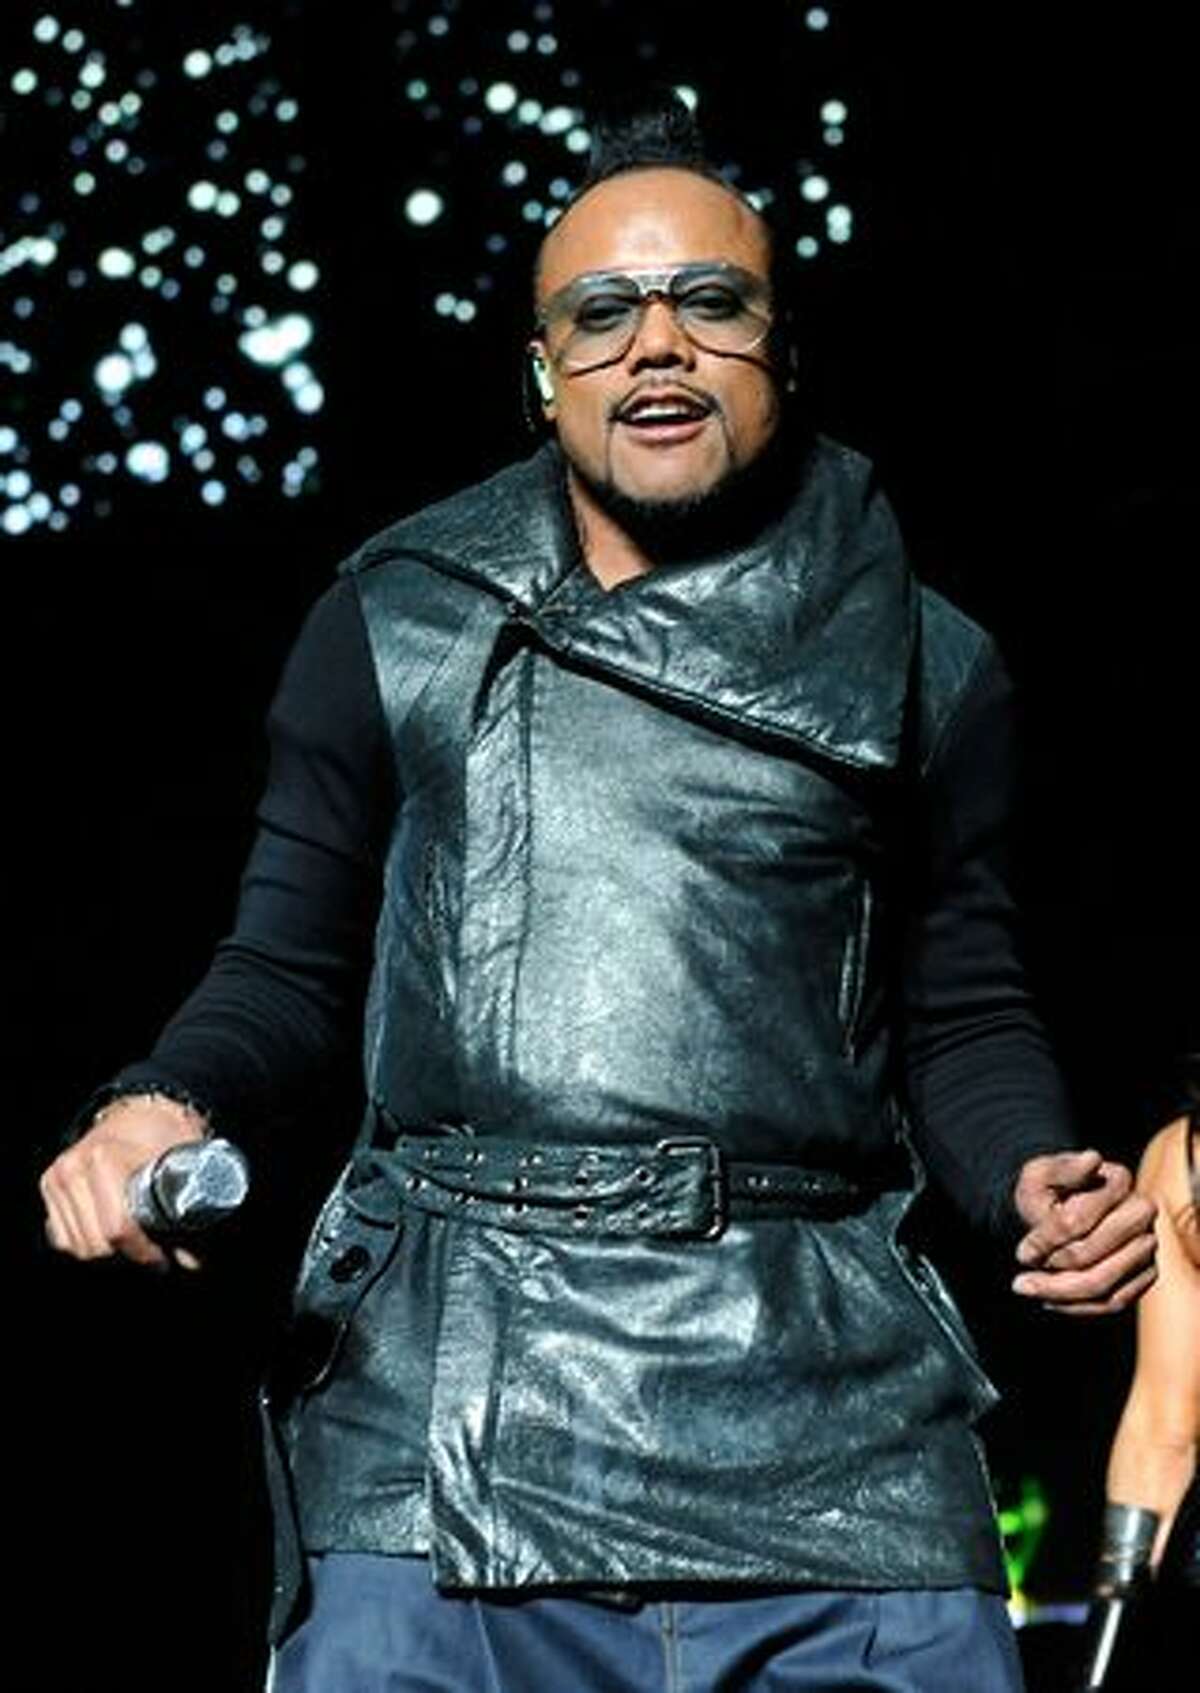 Singer apl.de.ap of the Black Eyed Peas performs at the Mandalay Bay Events Center in Las Vegas, Nevada. The group is touring in support of the album, "The E.N.D."